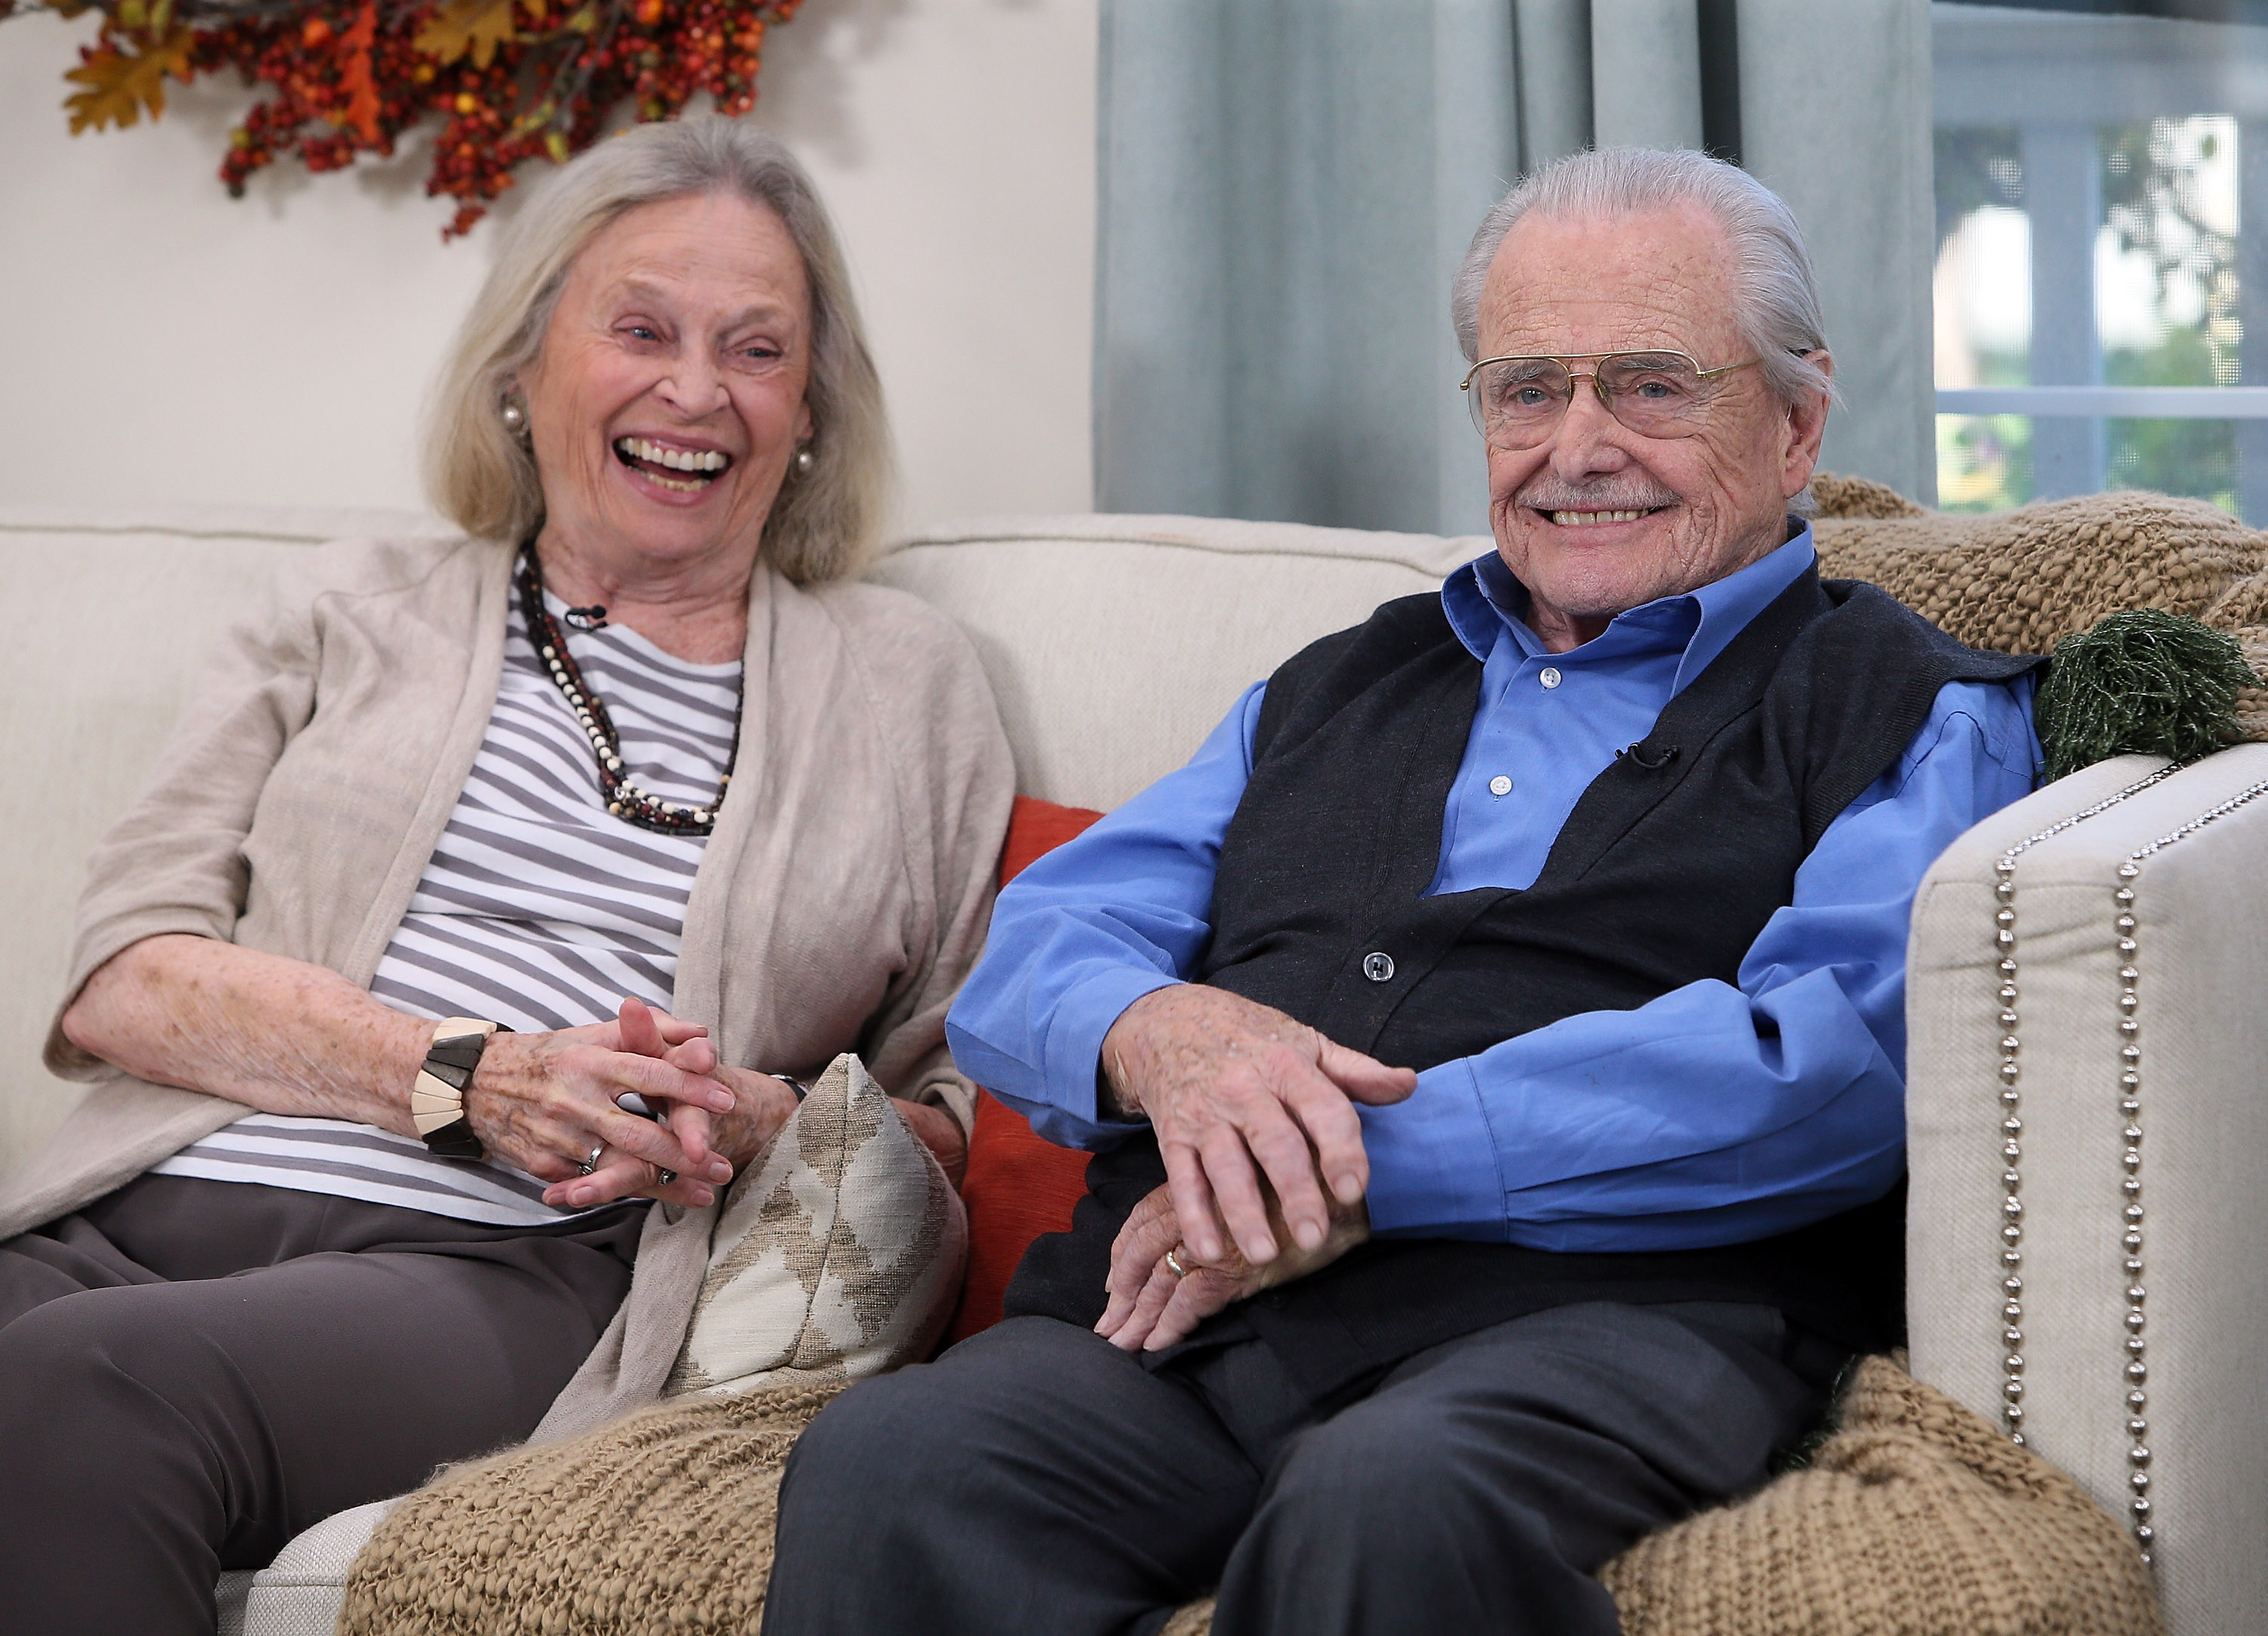 Actress Bonnie Bartlett (L) and husband, actor William Daniels, at Hallmark's "Home & Family" at Universal Studios Hollywood on October 25, 2017 in Universal City, California | Source: Getty Images